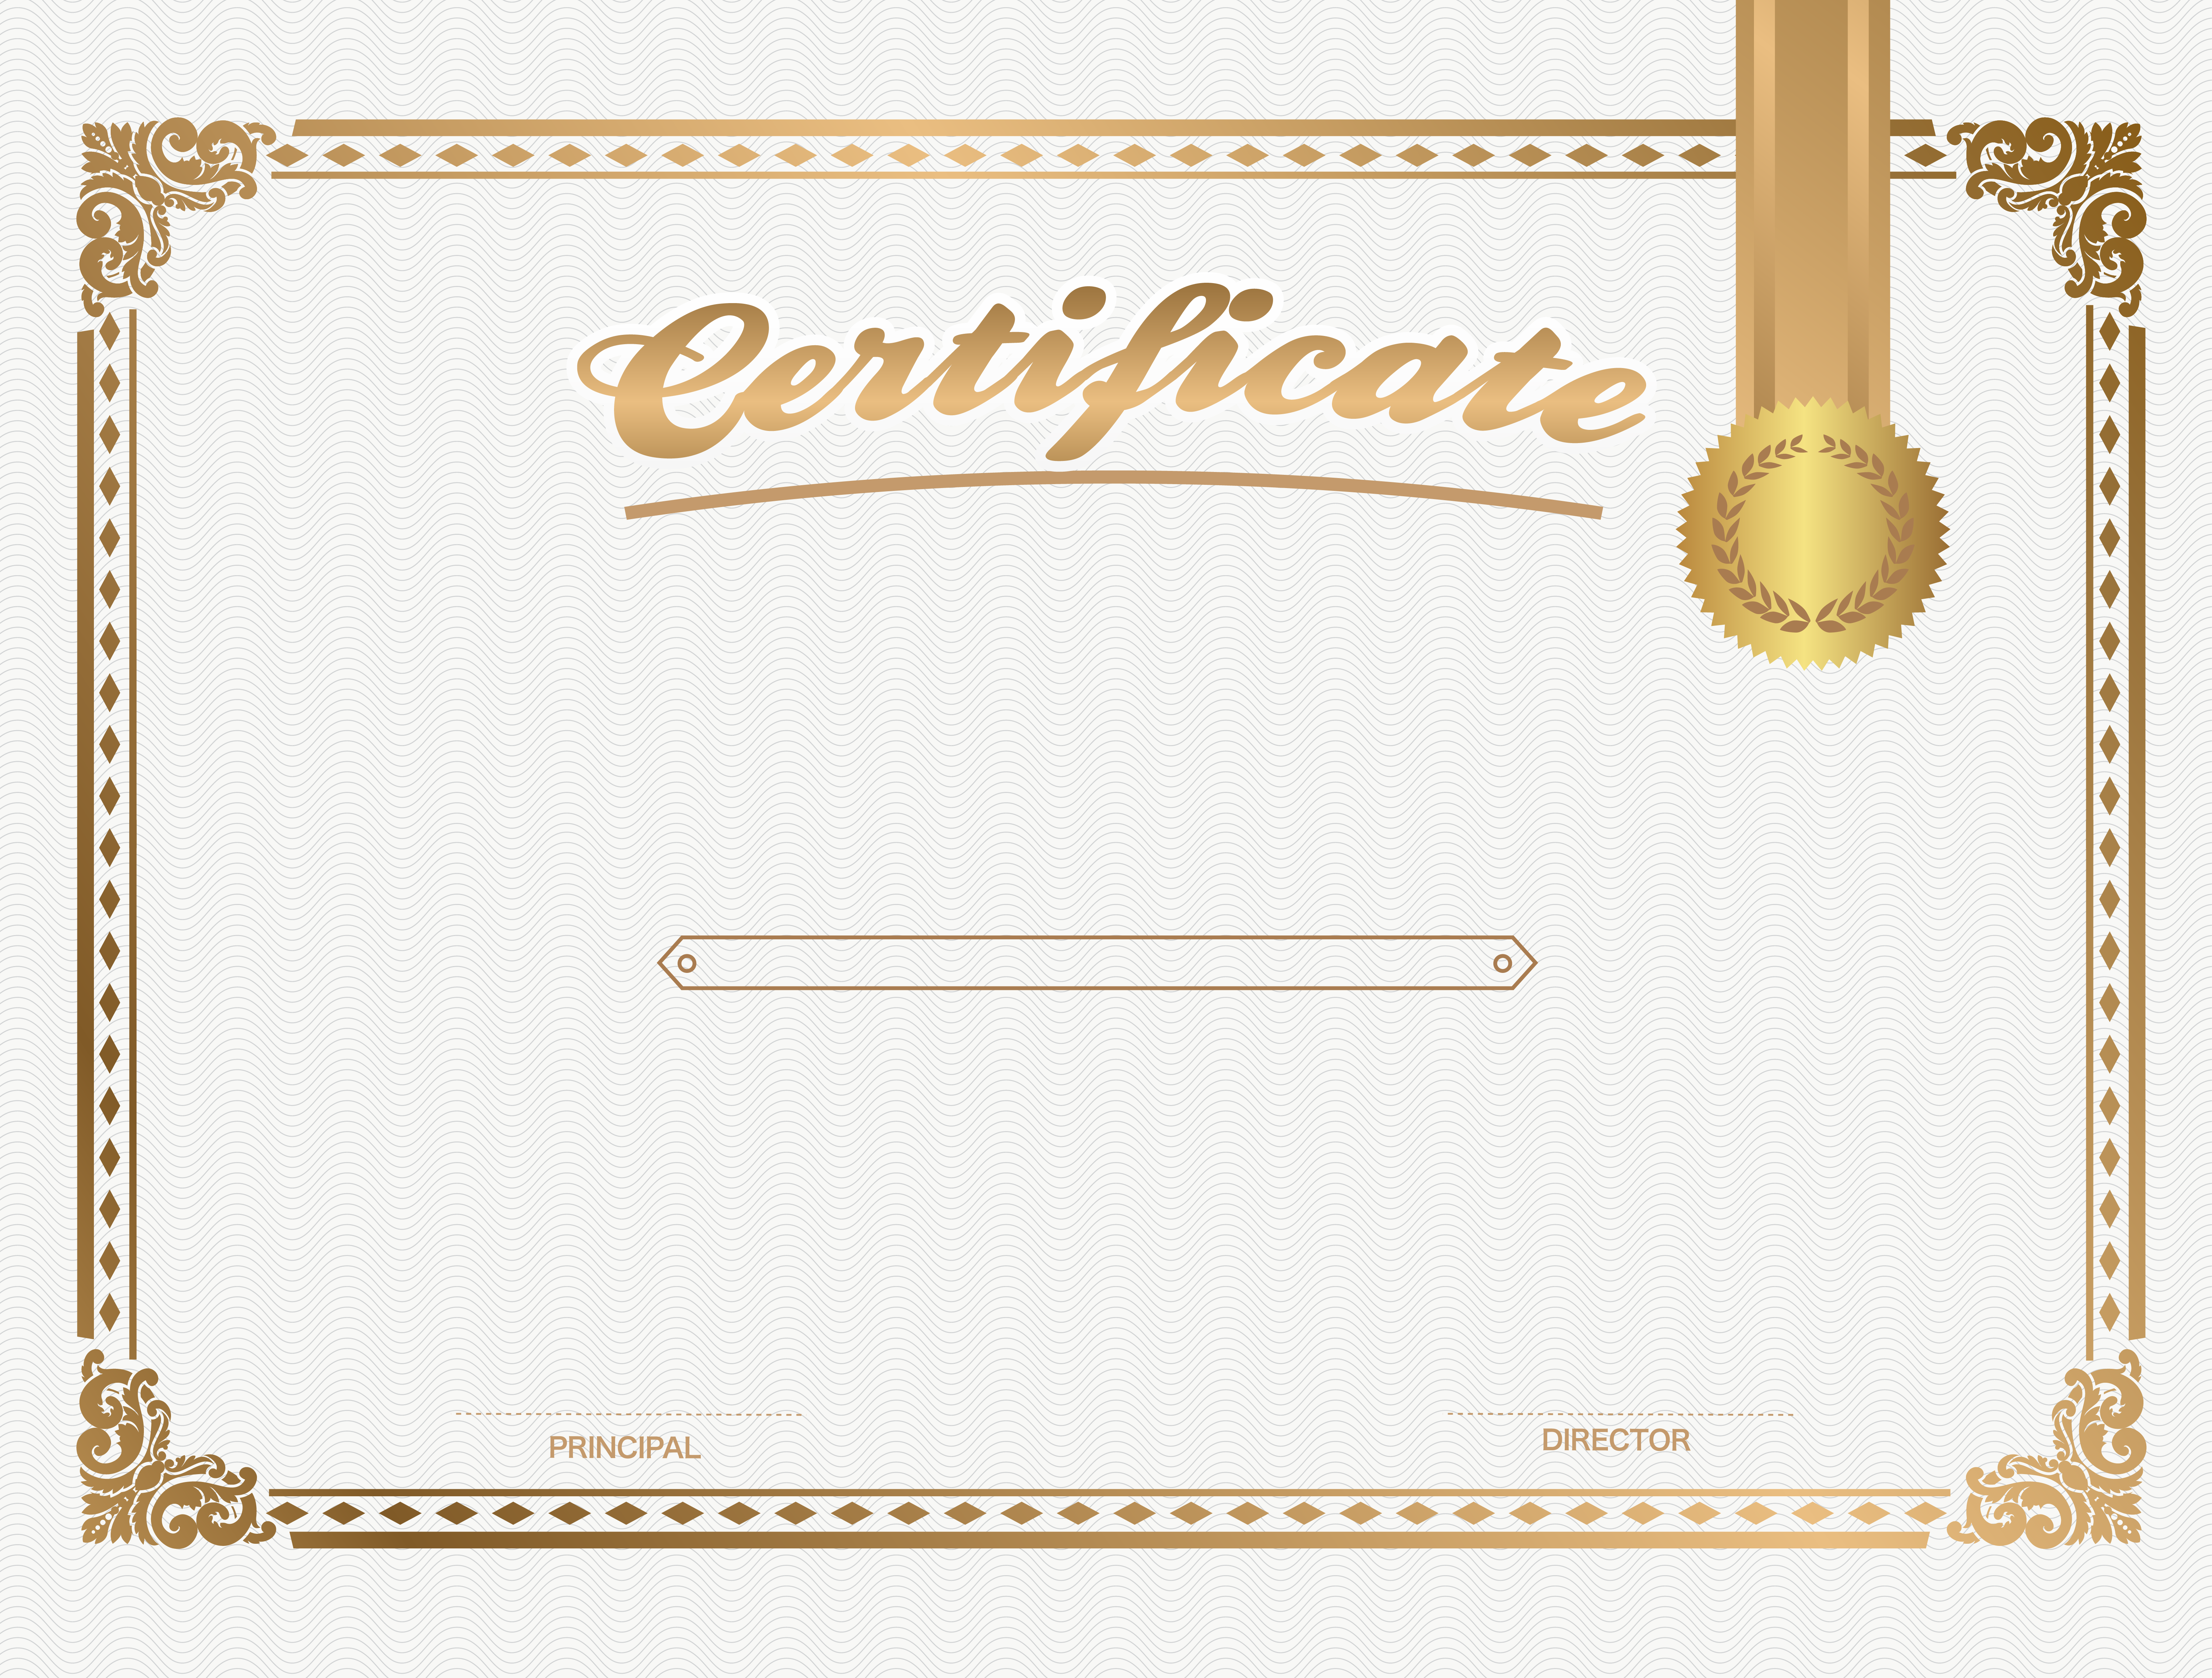 Certificate Design PNG Clipart Background